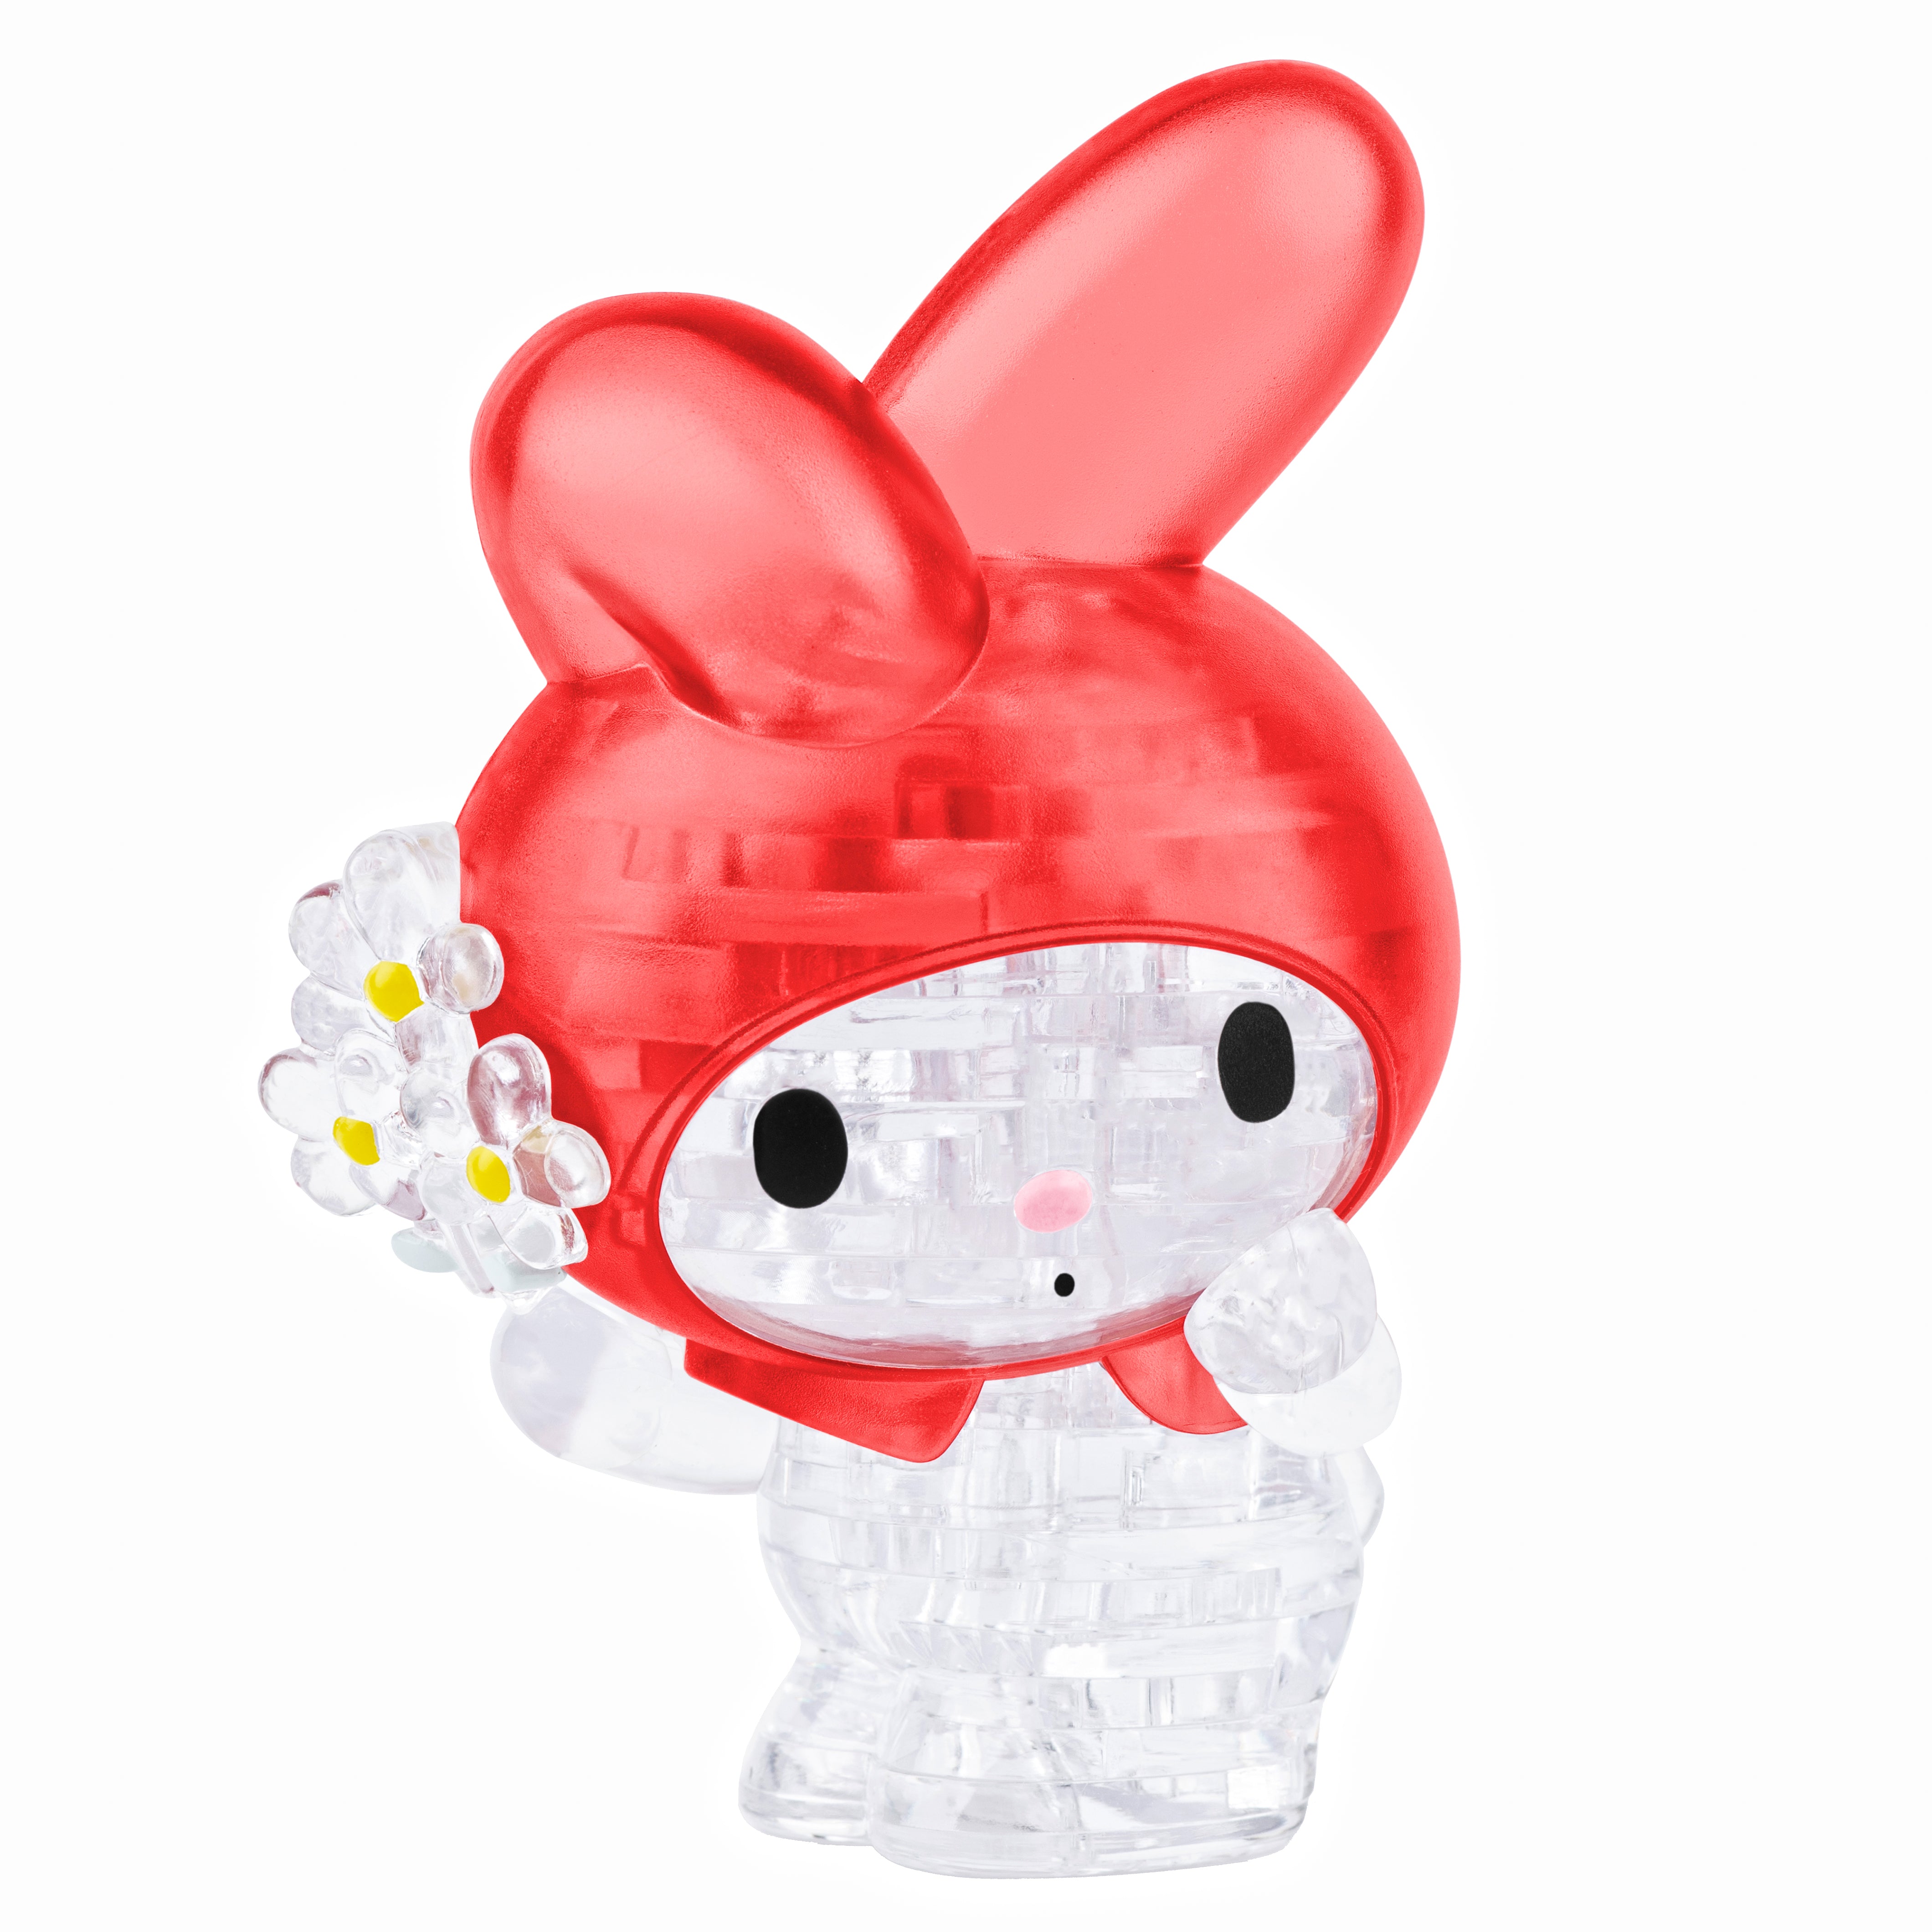 Chat With My Melody Via Text Message Everyday With Sanrio's